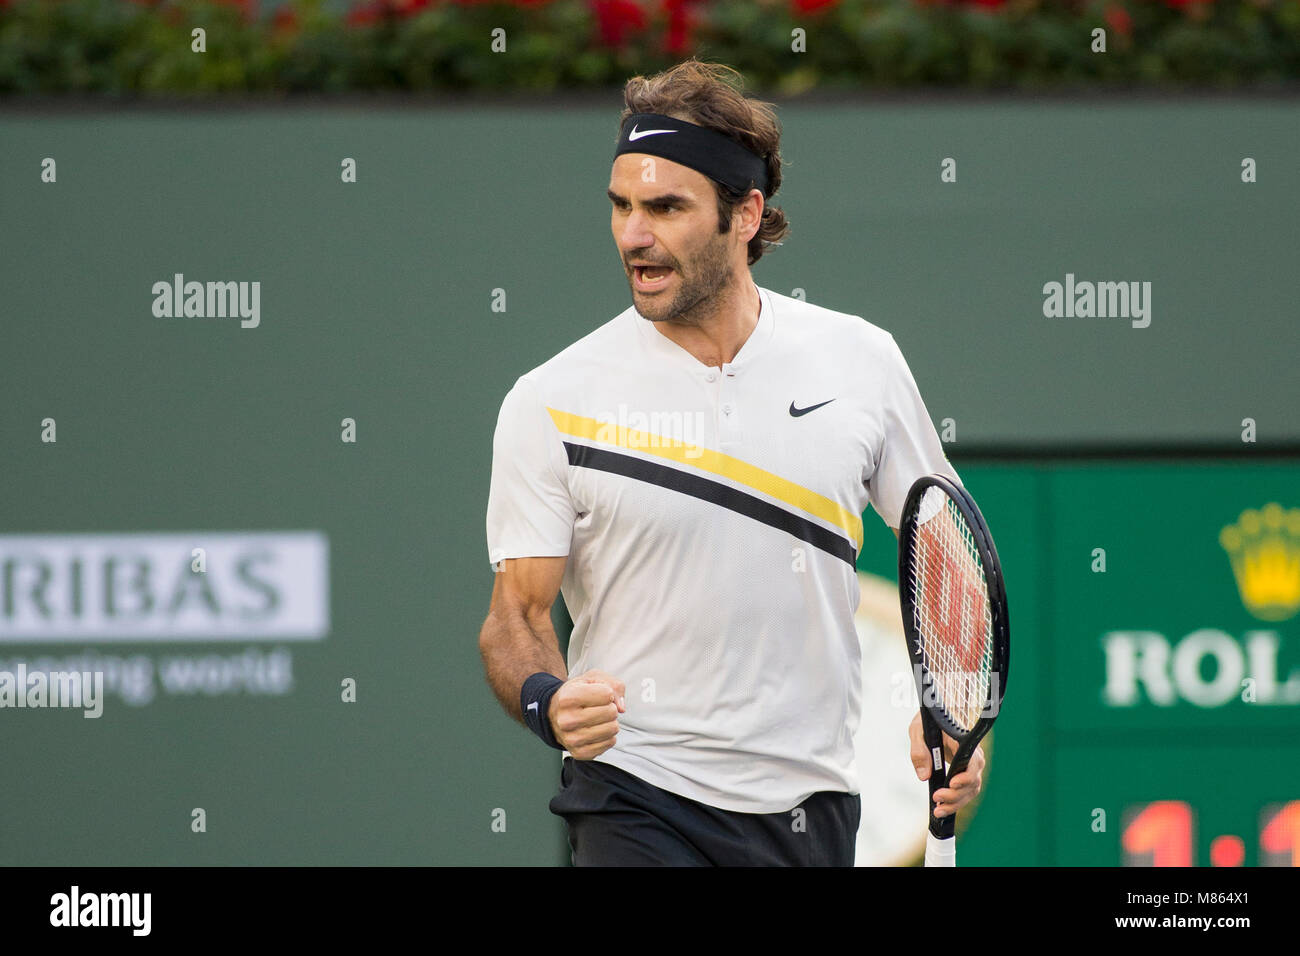 Indian Wells, California, USA. 14th Mar, 2018. Roger Federer (SUI) defeated  Jeremy Chardy (FRA) 7-5, 6-4 in Wells Tennis Garden in Indian Wells,  California. © Mal Taam/TennisClix/CSM/Alamy Live News Stock Photo - Alamy